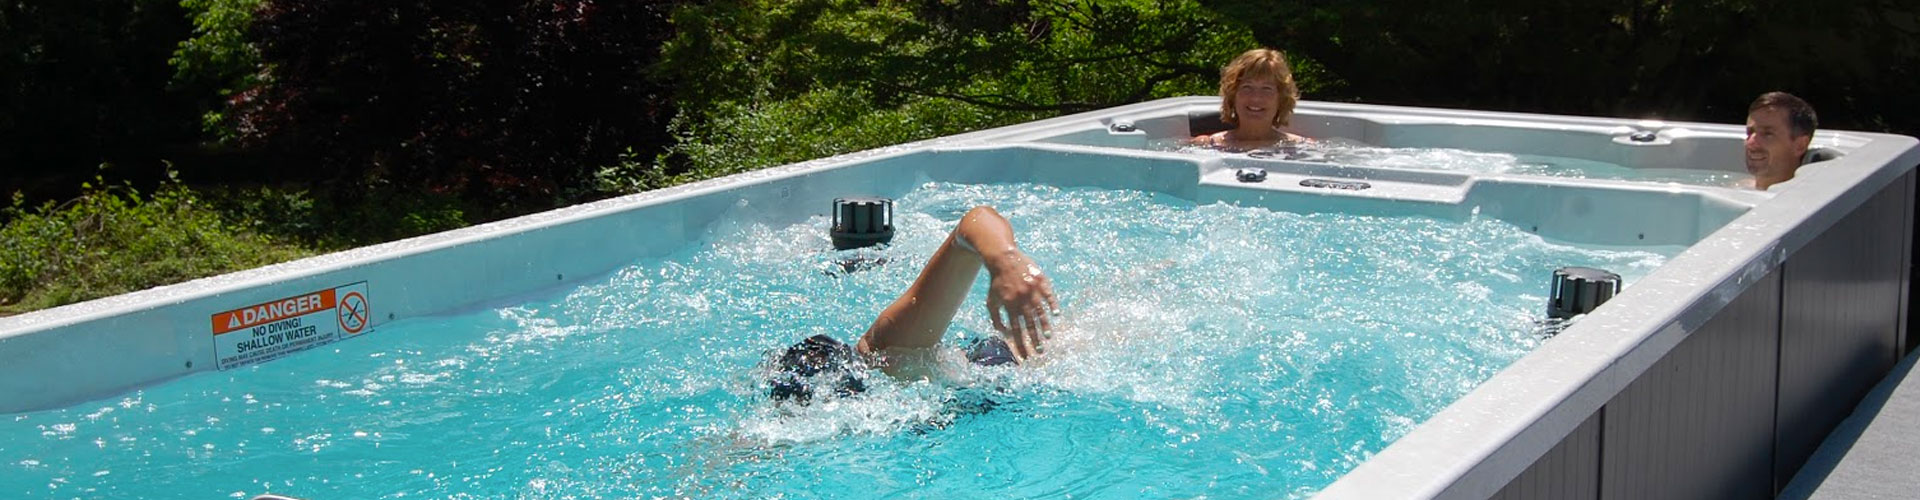 How to Deliver a Fit HIIT to Your Pool